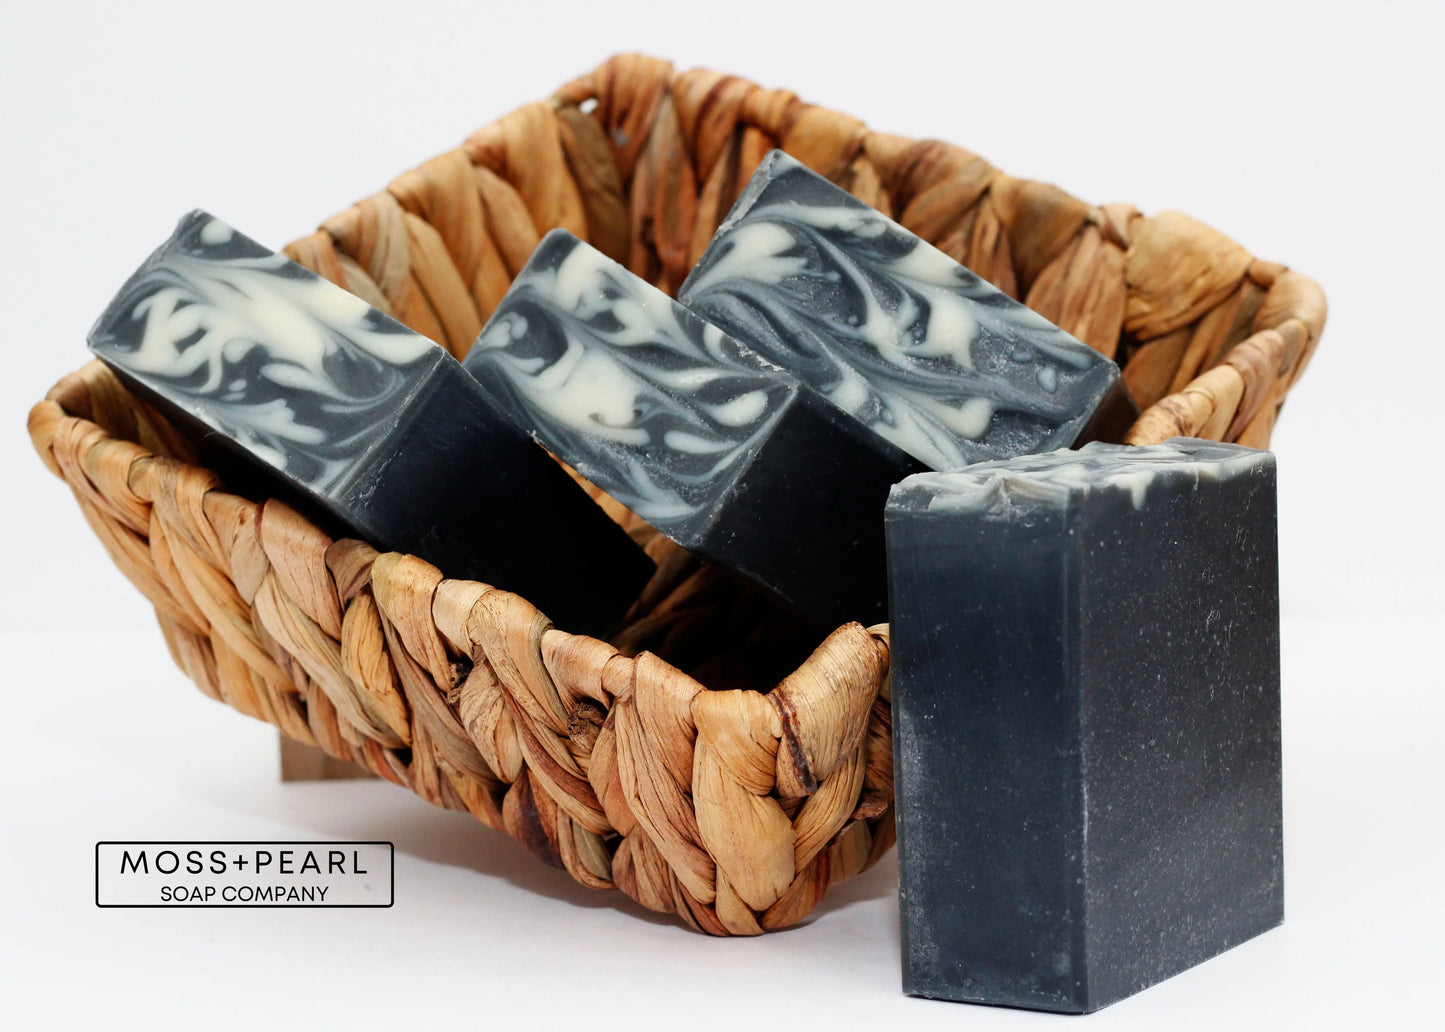 ACTIVATED CHARCOAL FACE BAR Moss + Pearl Soap Company